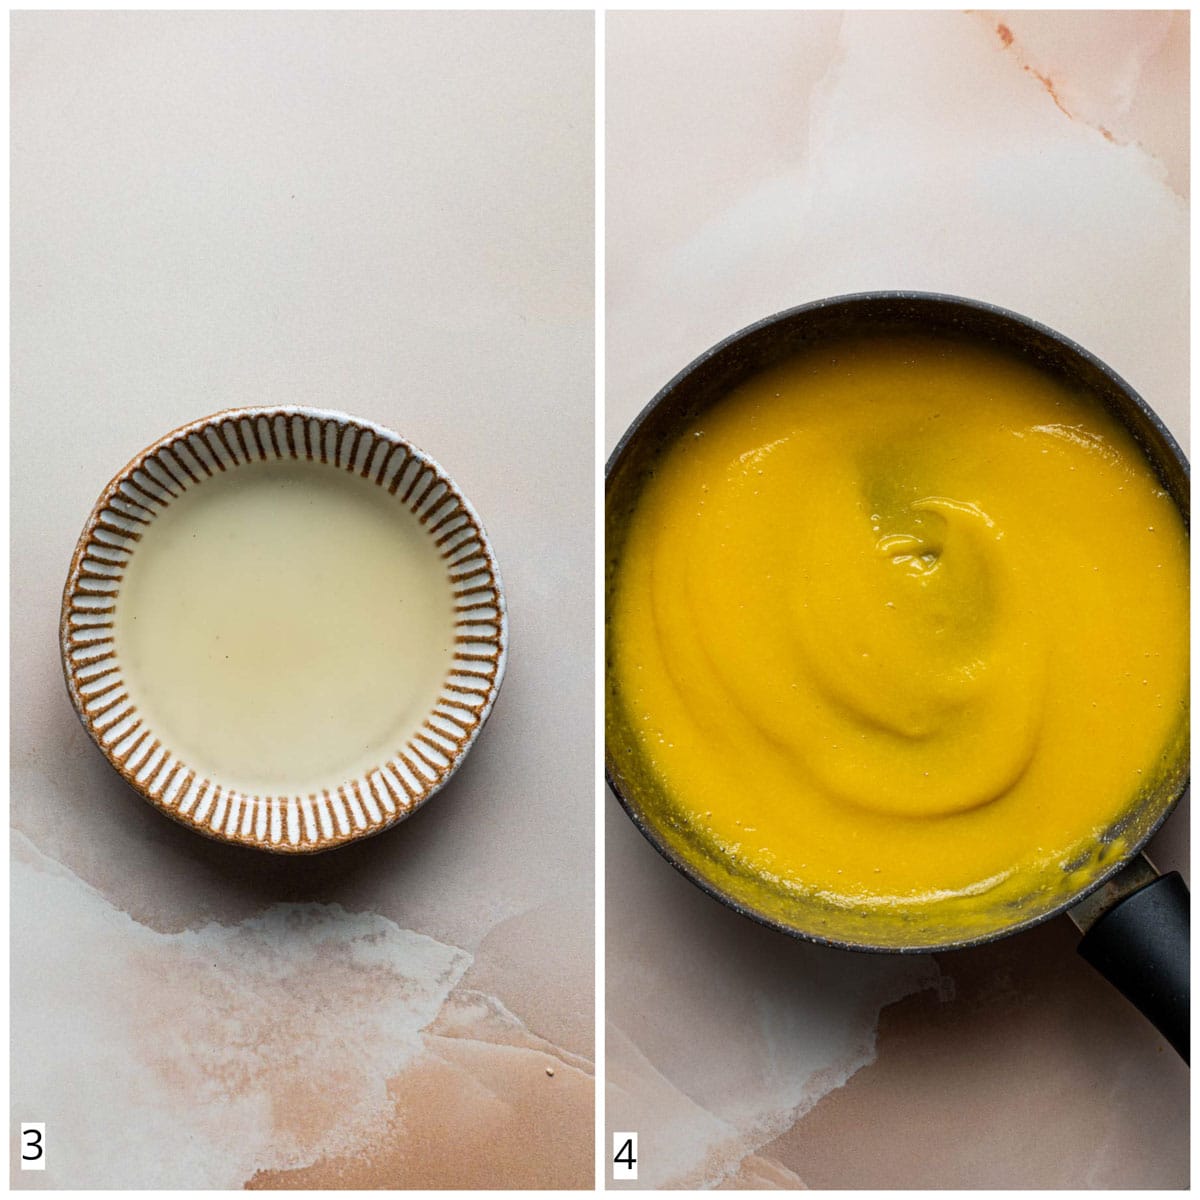 A collage of two images showing dissolved agar powder and mango puree in a pan.